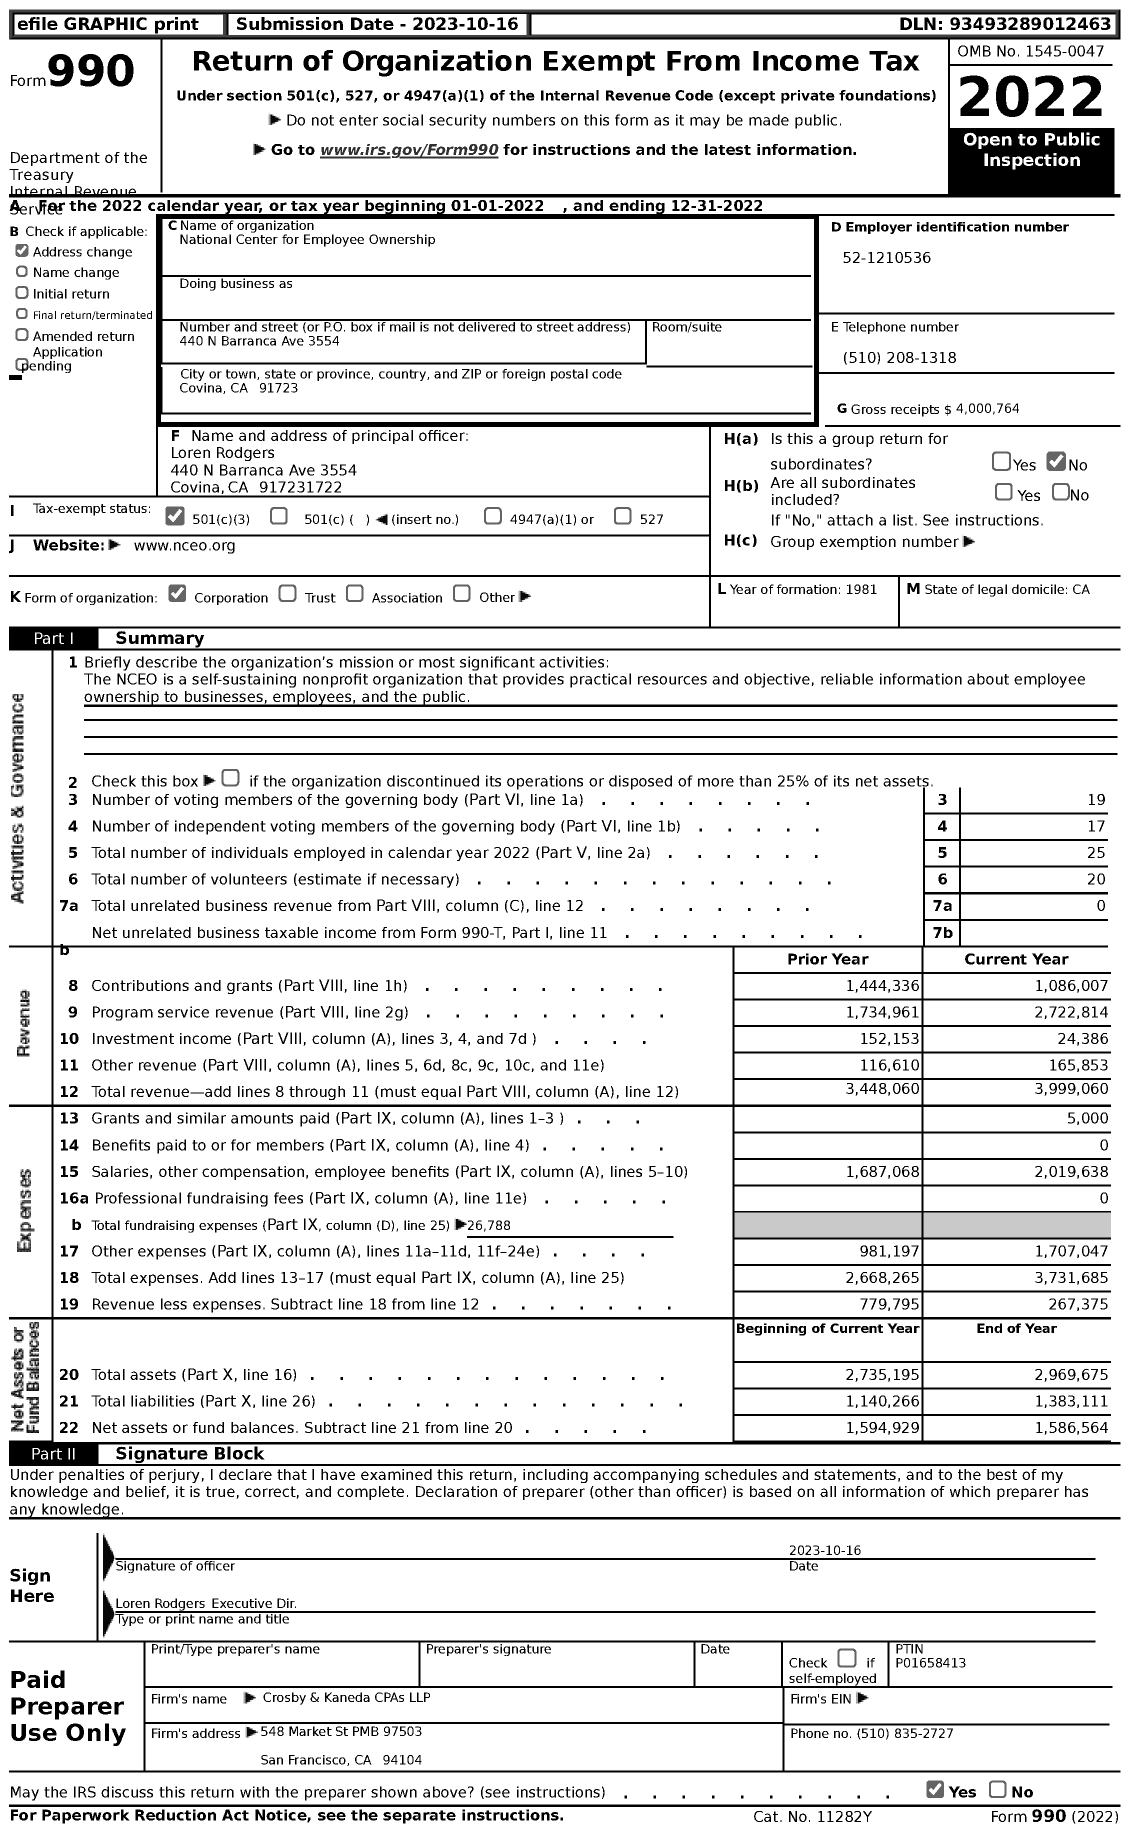 Image of first page of 2022 Form 990 for National Center for Employee Ownership